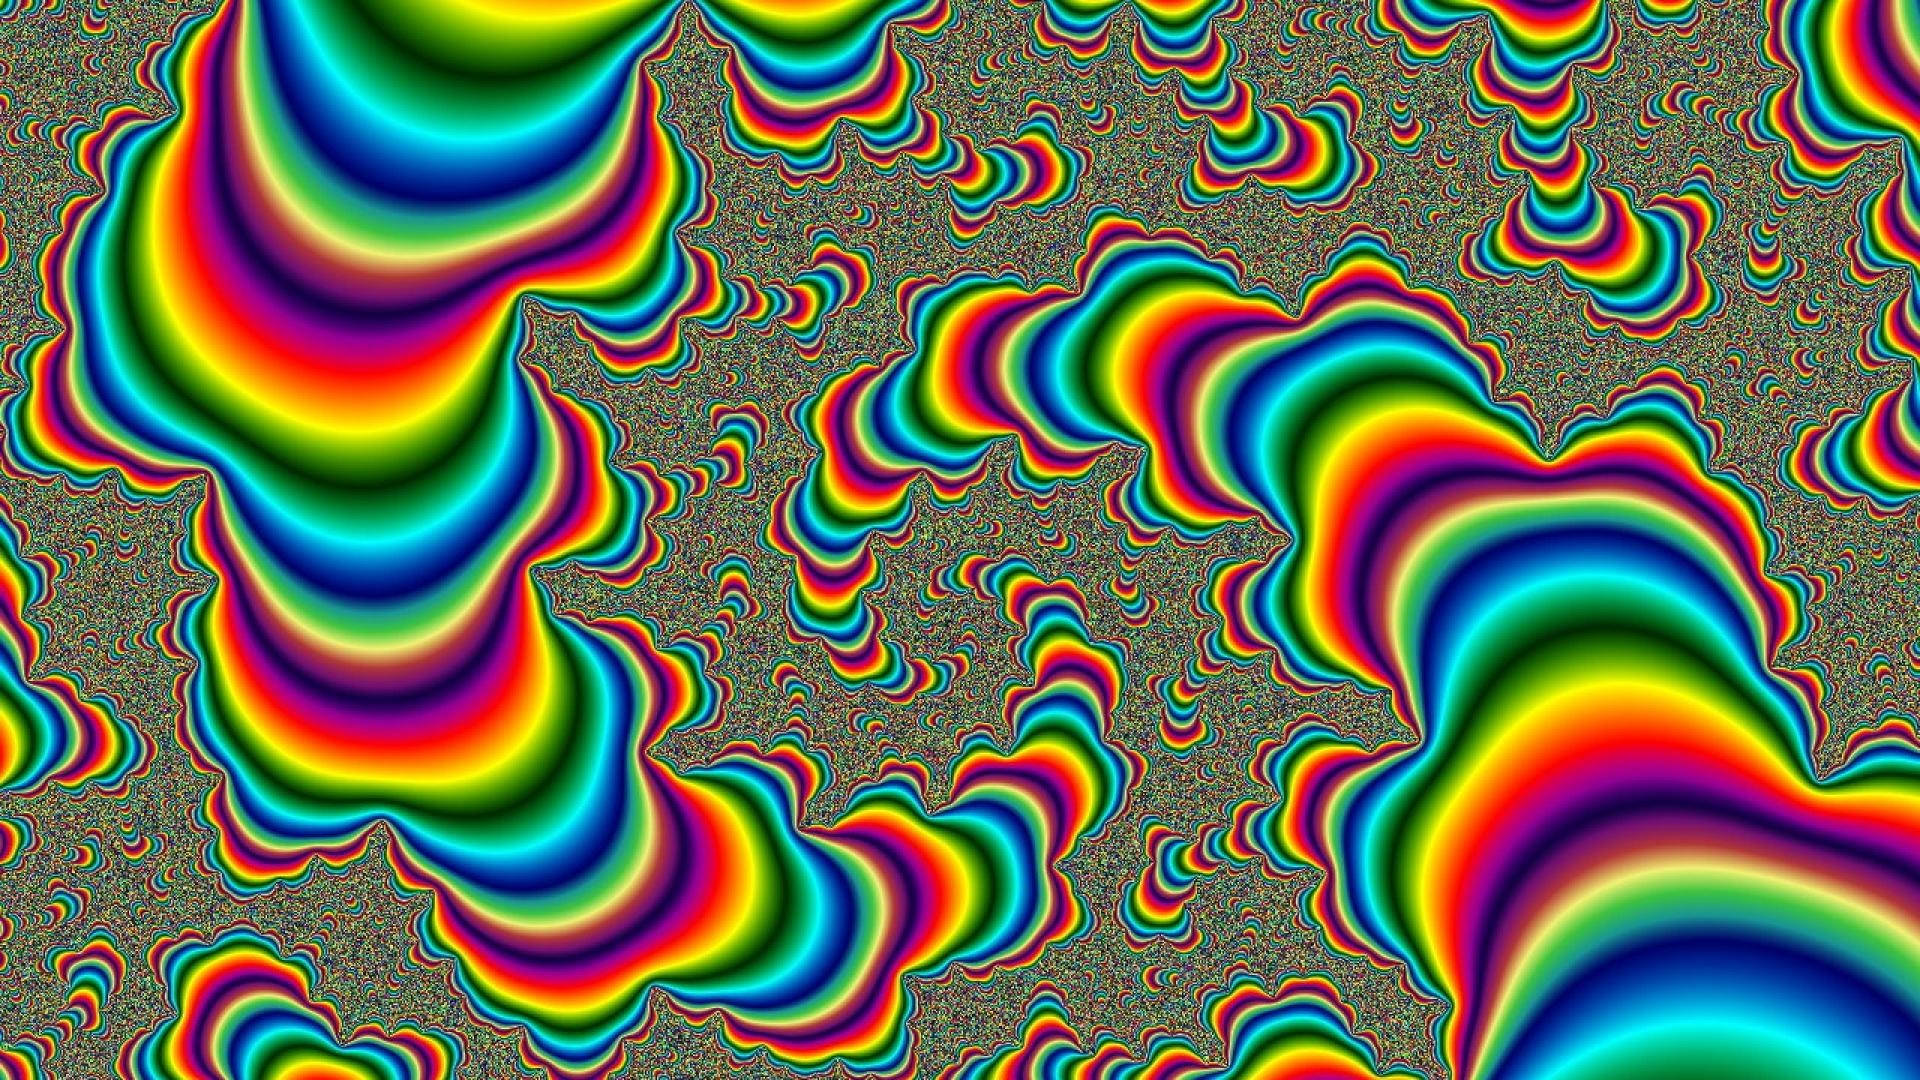 Hd Psychedelic Worms